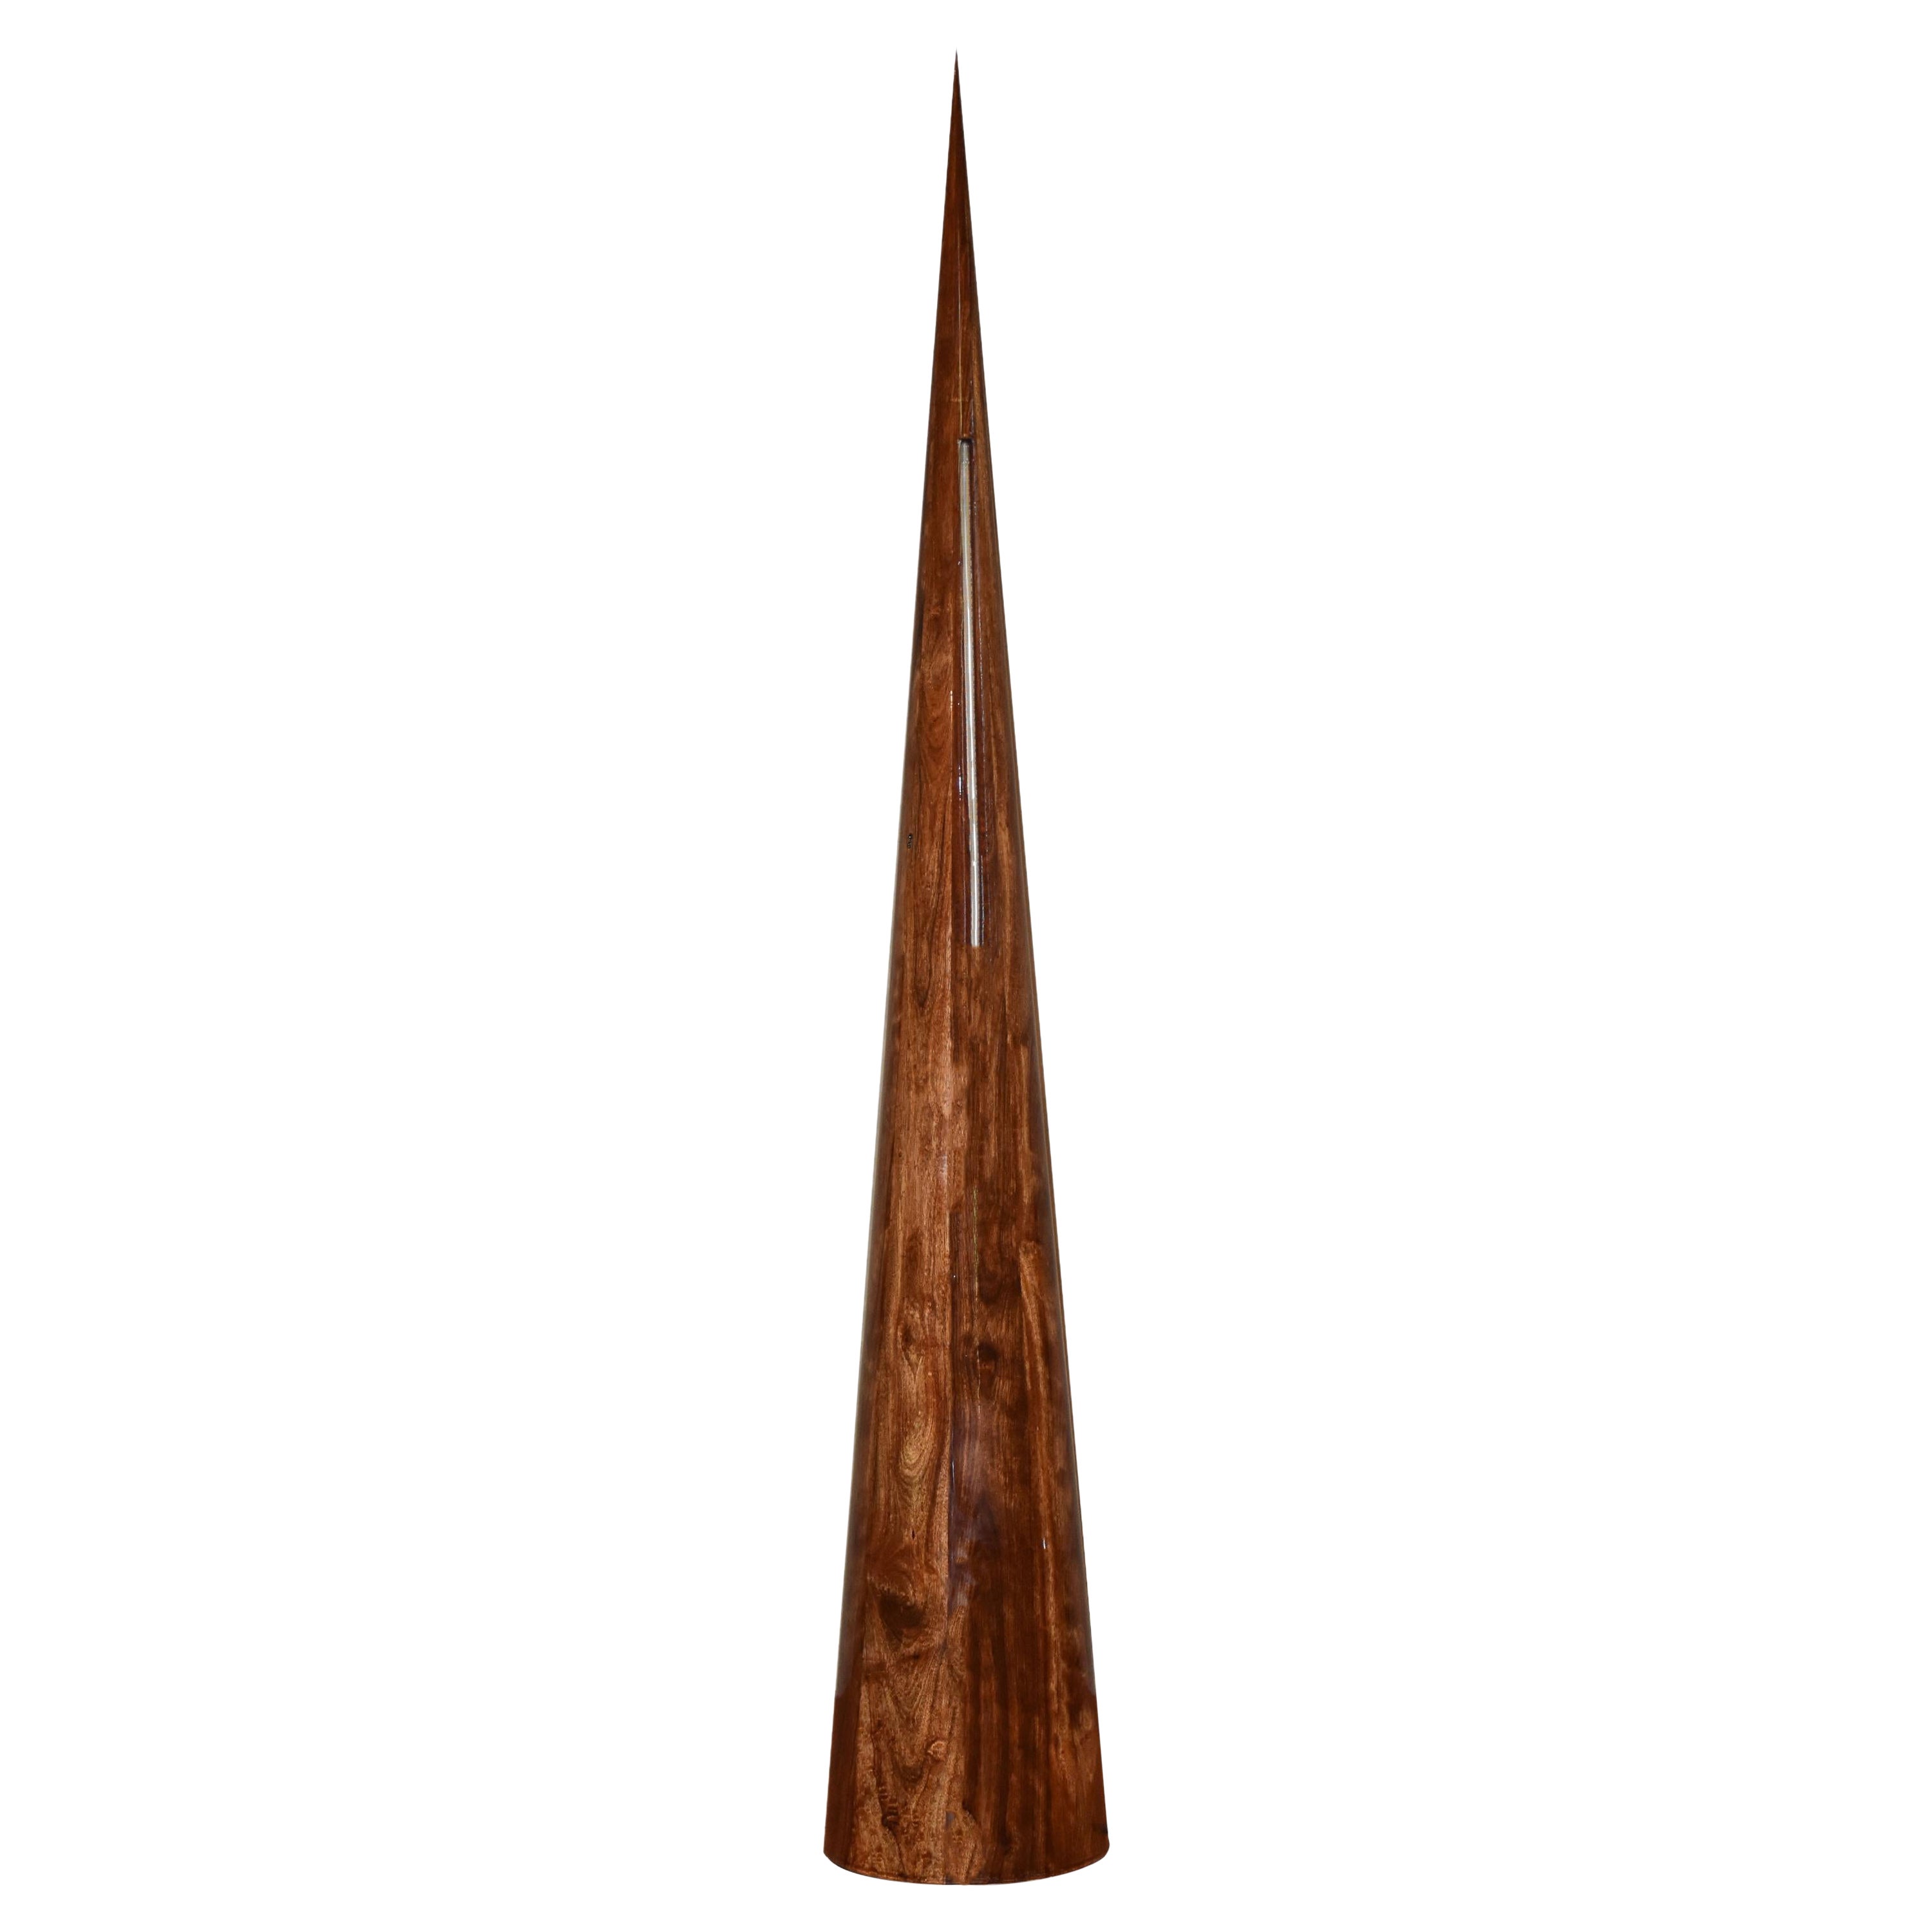 Chechen Wood Floor Lamp by Alina Rotzinger